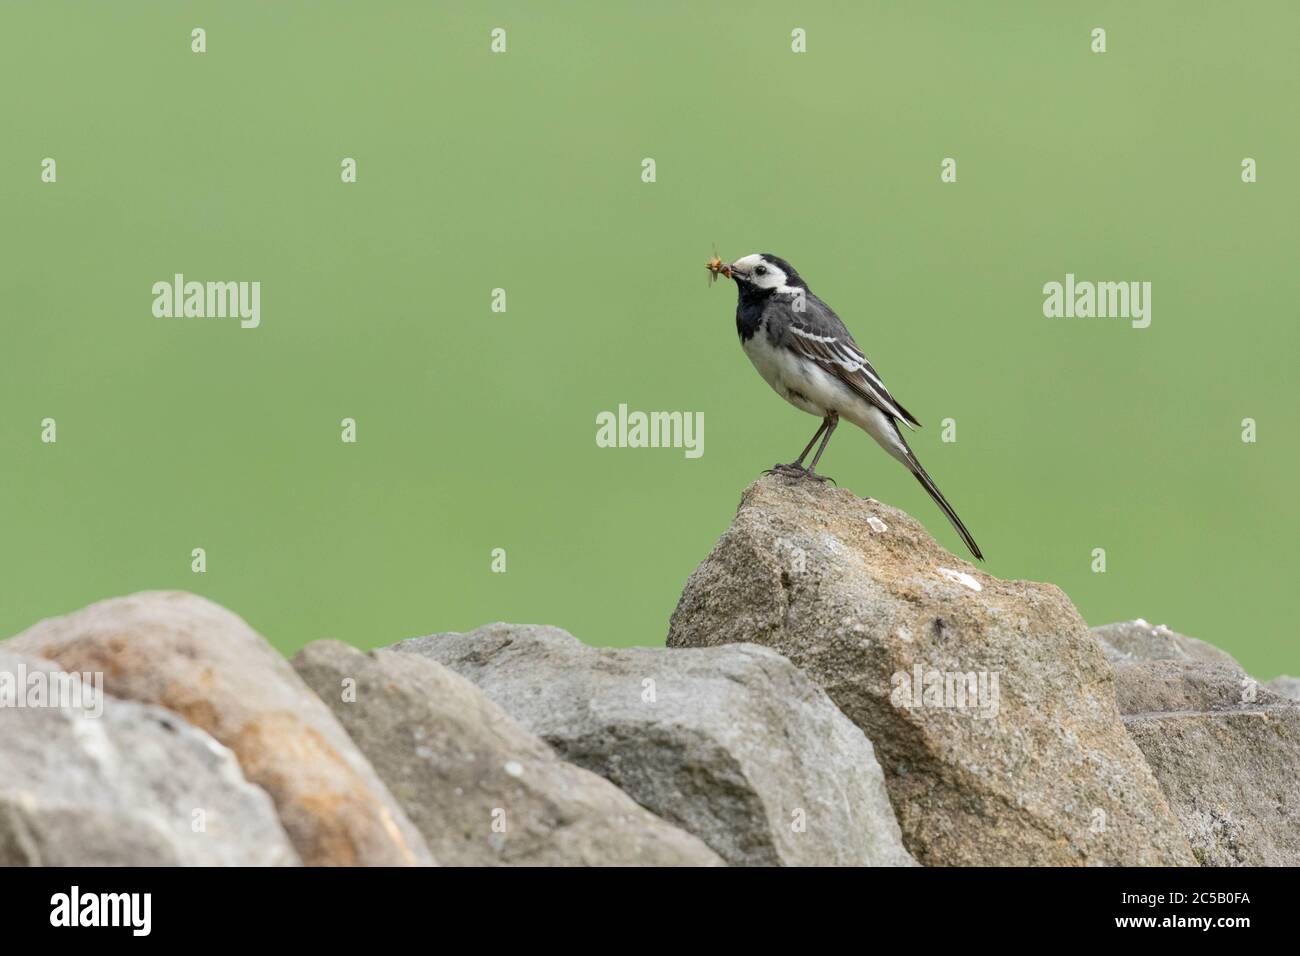 A single Pied Wagtail (UK) perched on a dry stone wall against a blank green background. The wagtail has food in it's beak ready to feed it's young. Stock Photo